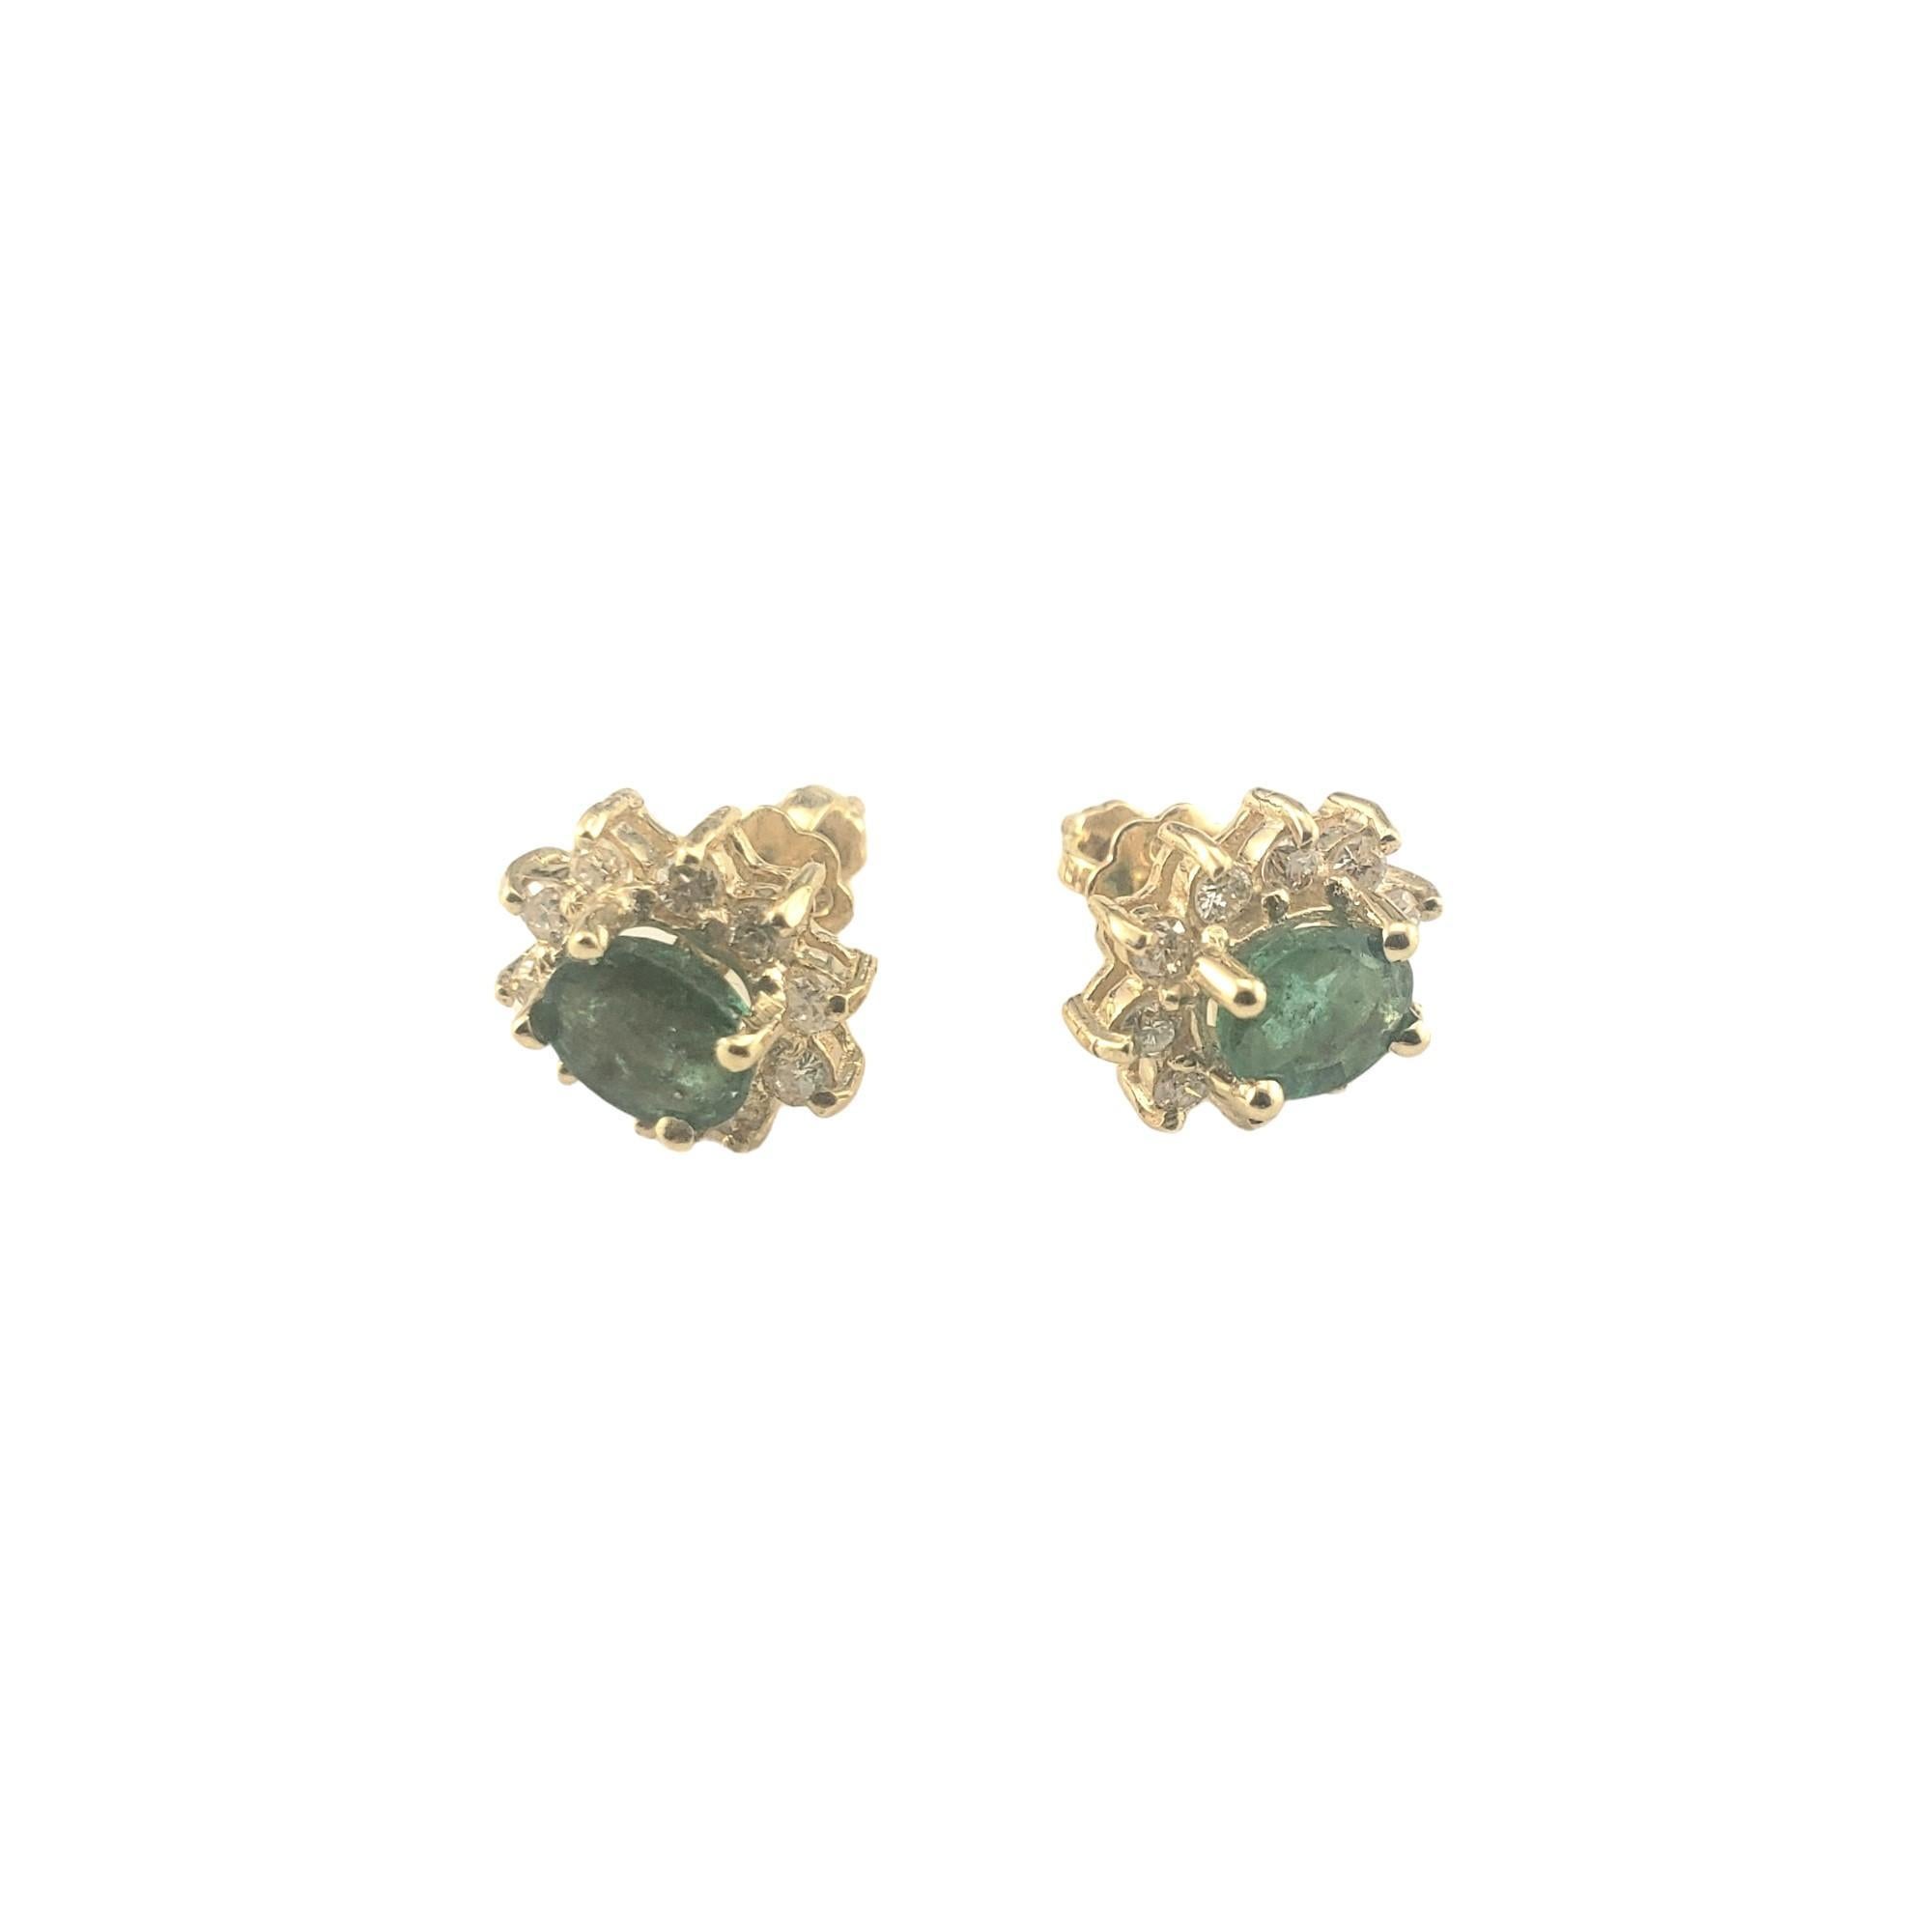 14K Yellow Gold Emerald and Diamond Earrings JAGi Certified-

These stunning earrings each feature one oval cut emerald (4.9 mm x 4 mm) and 10 round brilliant cut diamonds set in classic 14K yellow gold.  

Screw back closures.

Total emerald